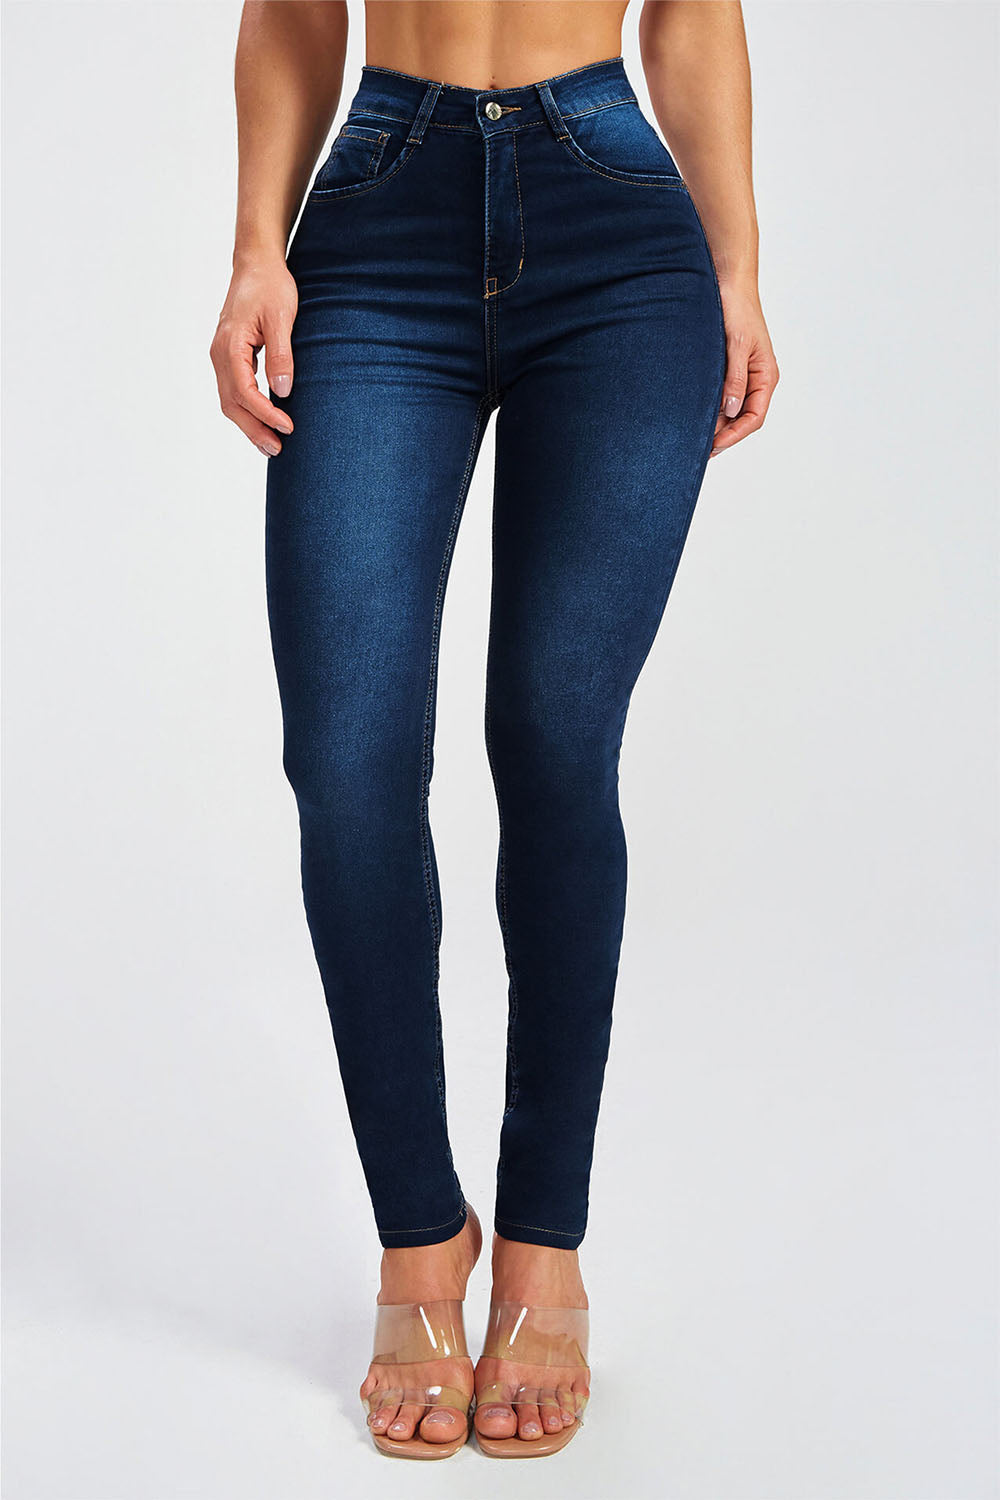 Buttoned Skinny Jeans - Dark / S - Bottoms - Pants - 5 - 2024